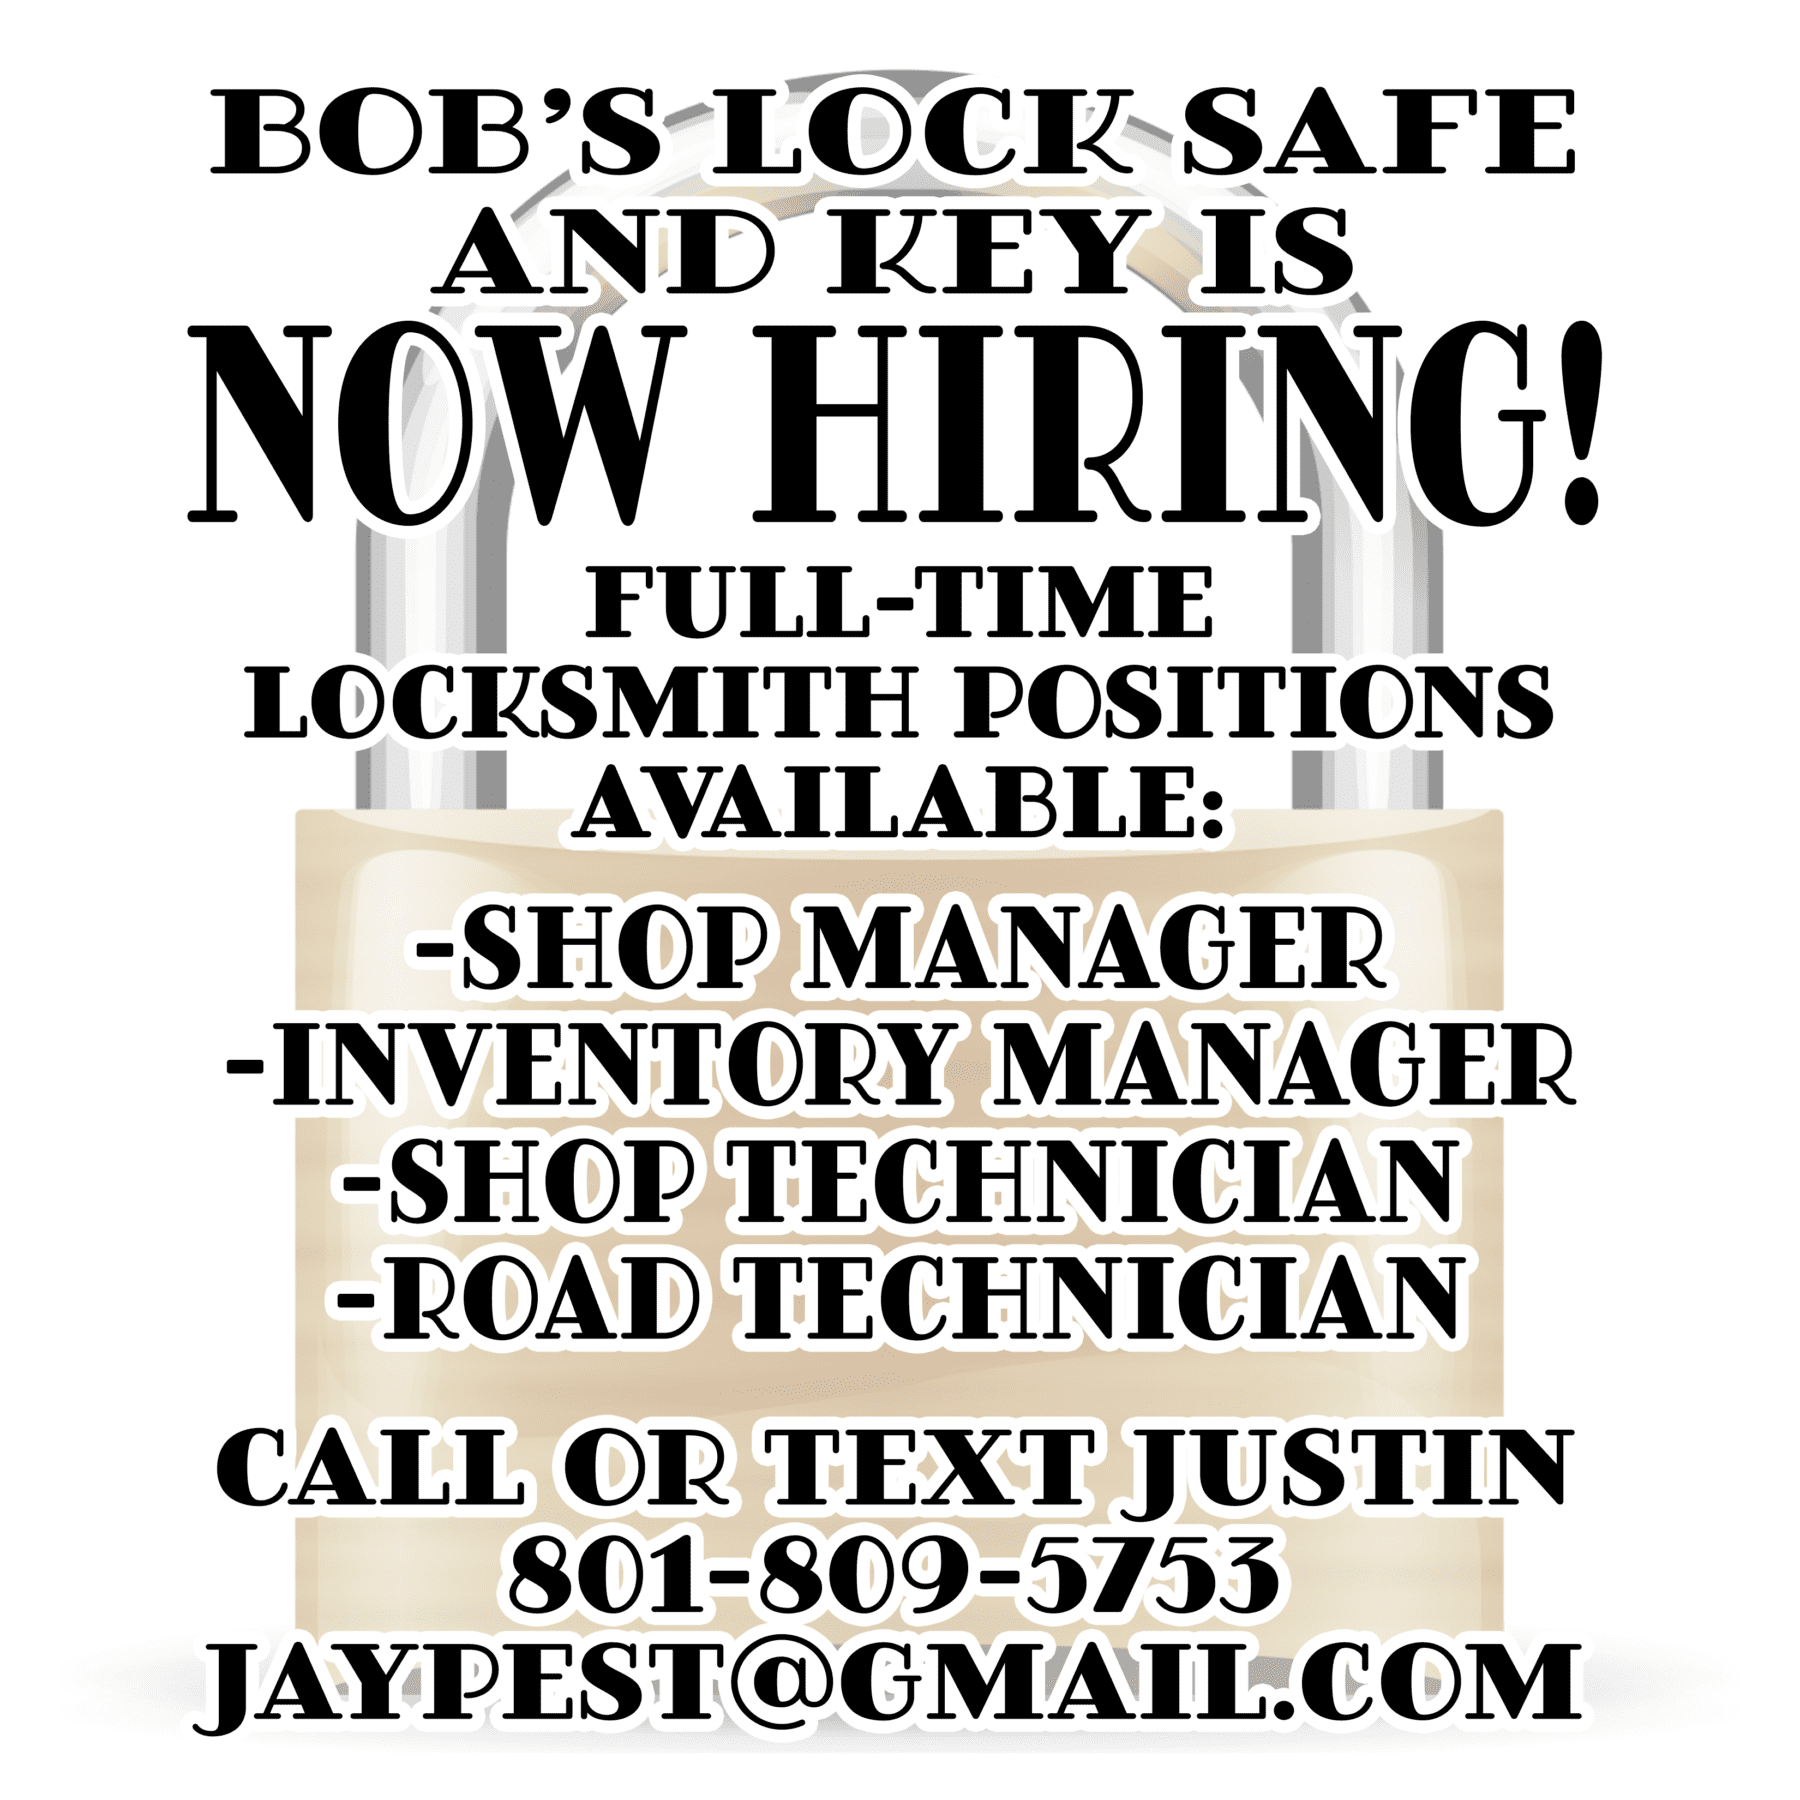 Bob's Lock Safe and Key is now hiring